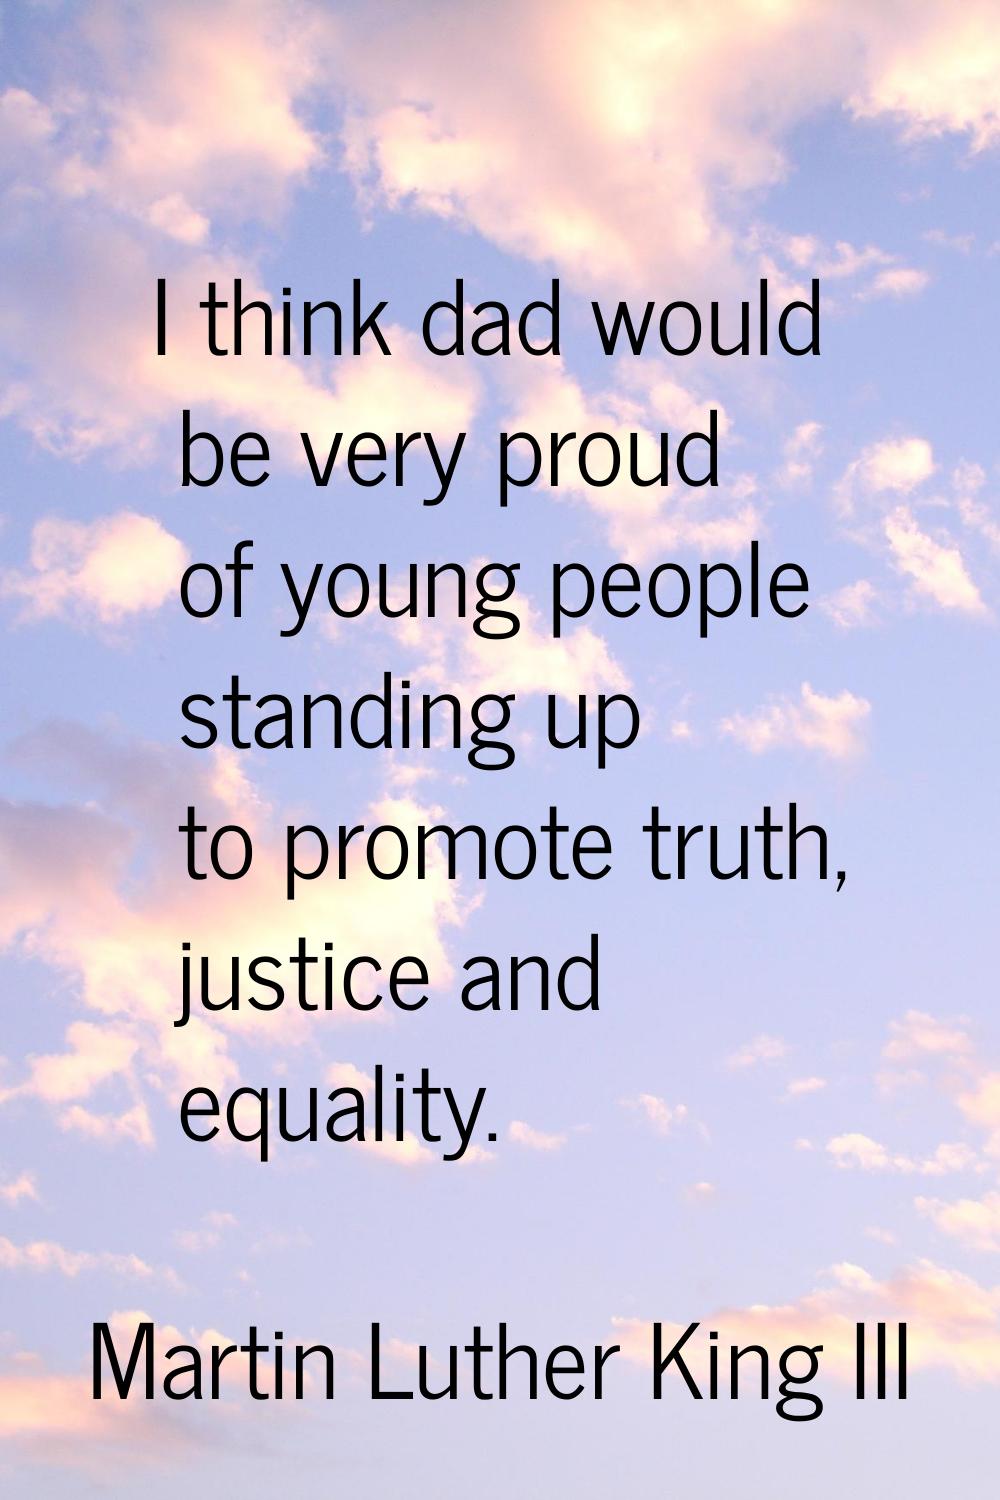 I think dad would be very proud of young people standing up to promote truth, justice and equality.